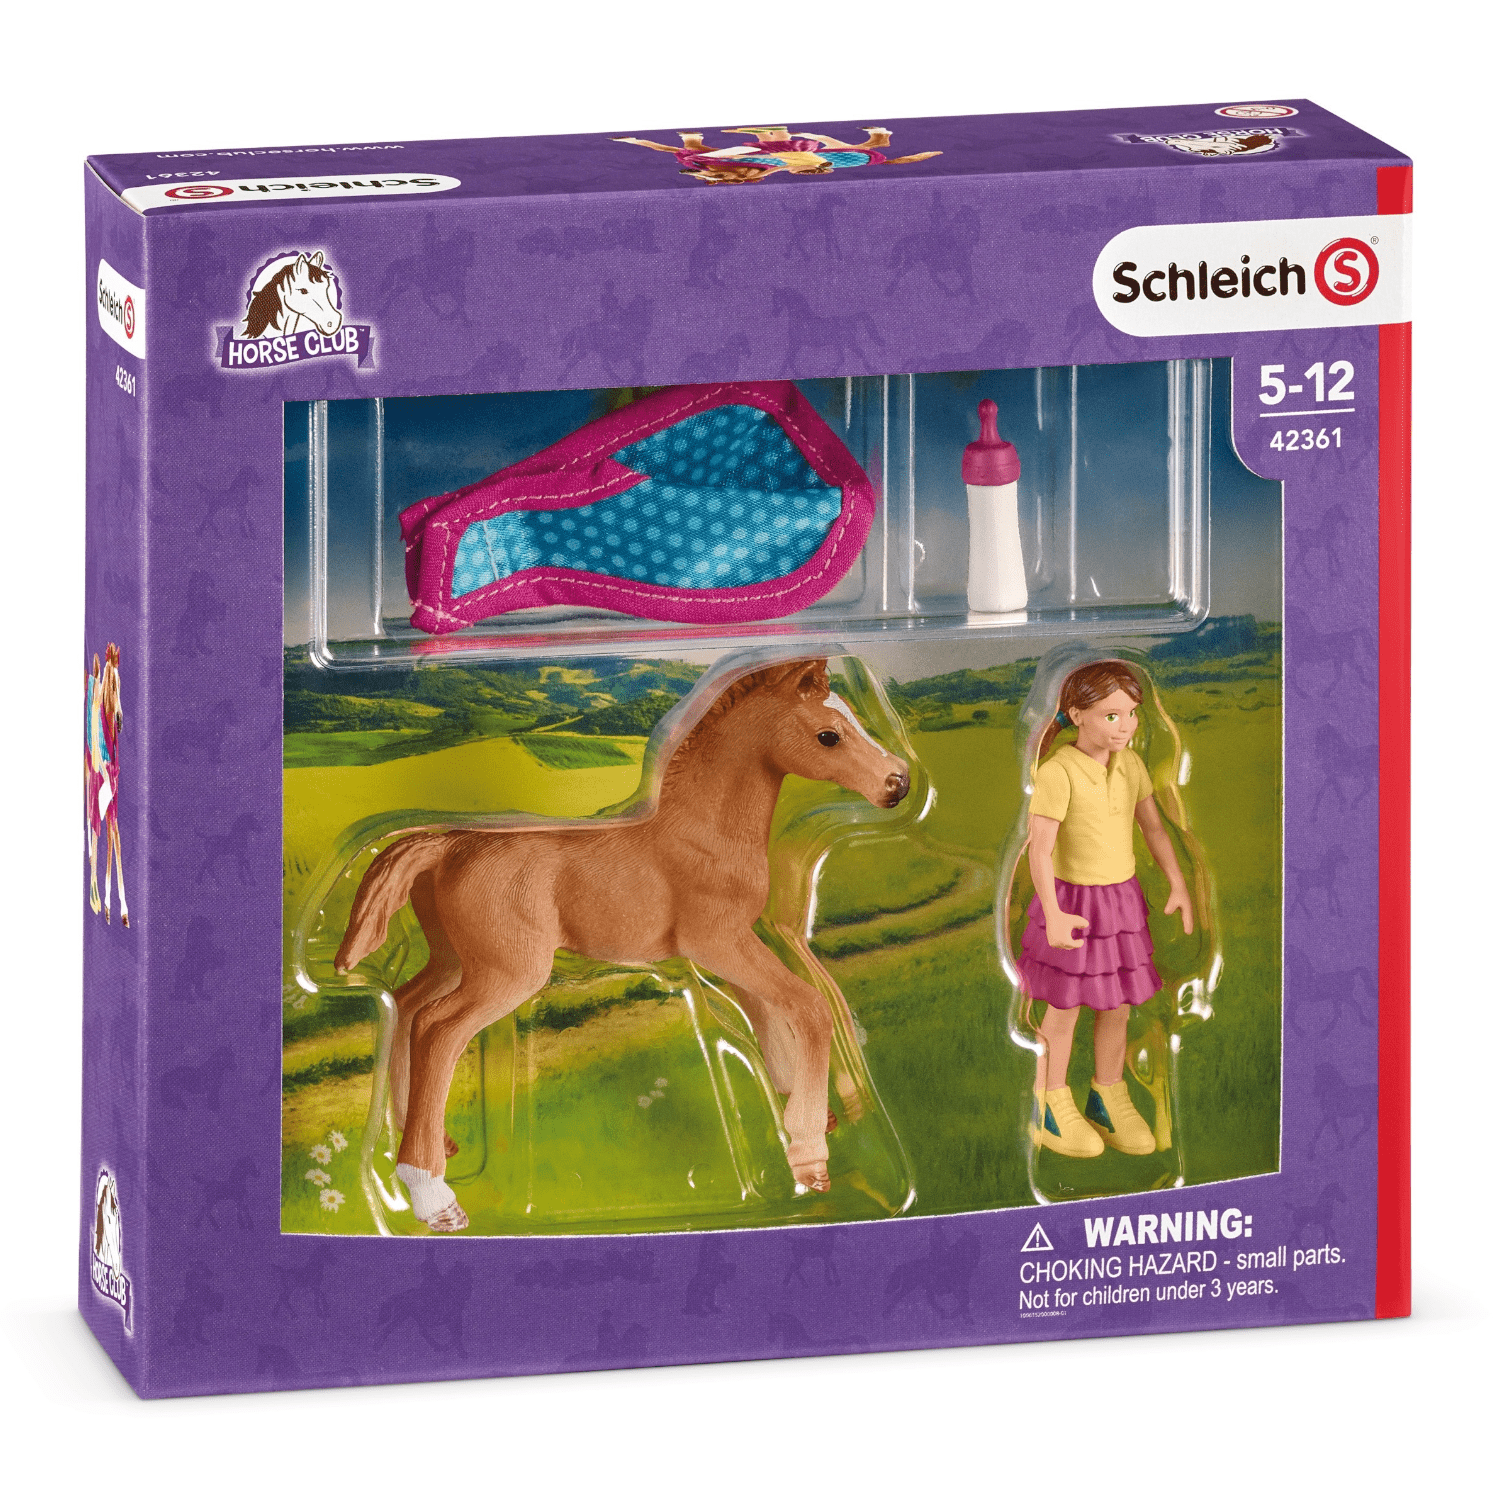 Schleich 42361 Foal with Blanket NEW!! 